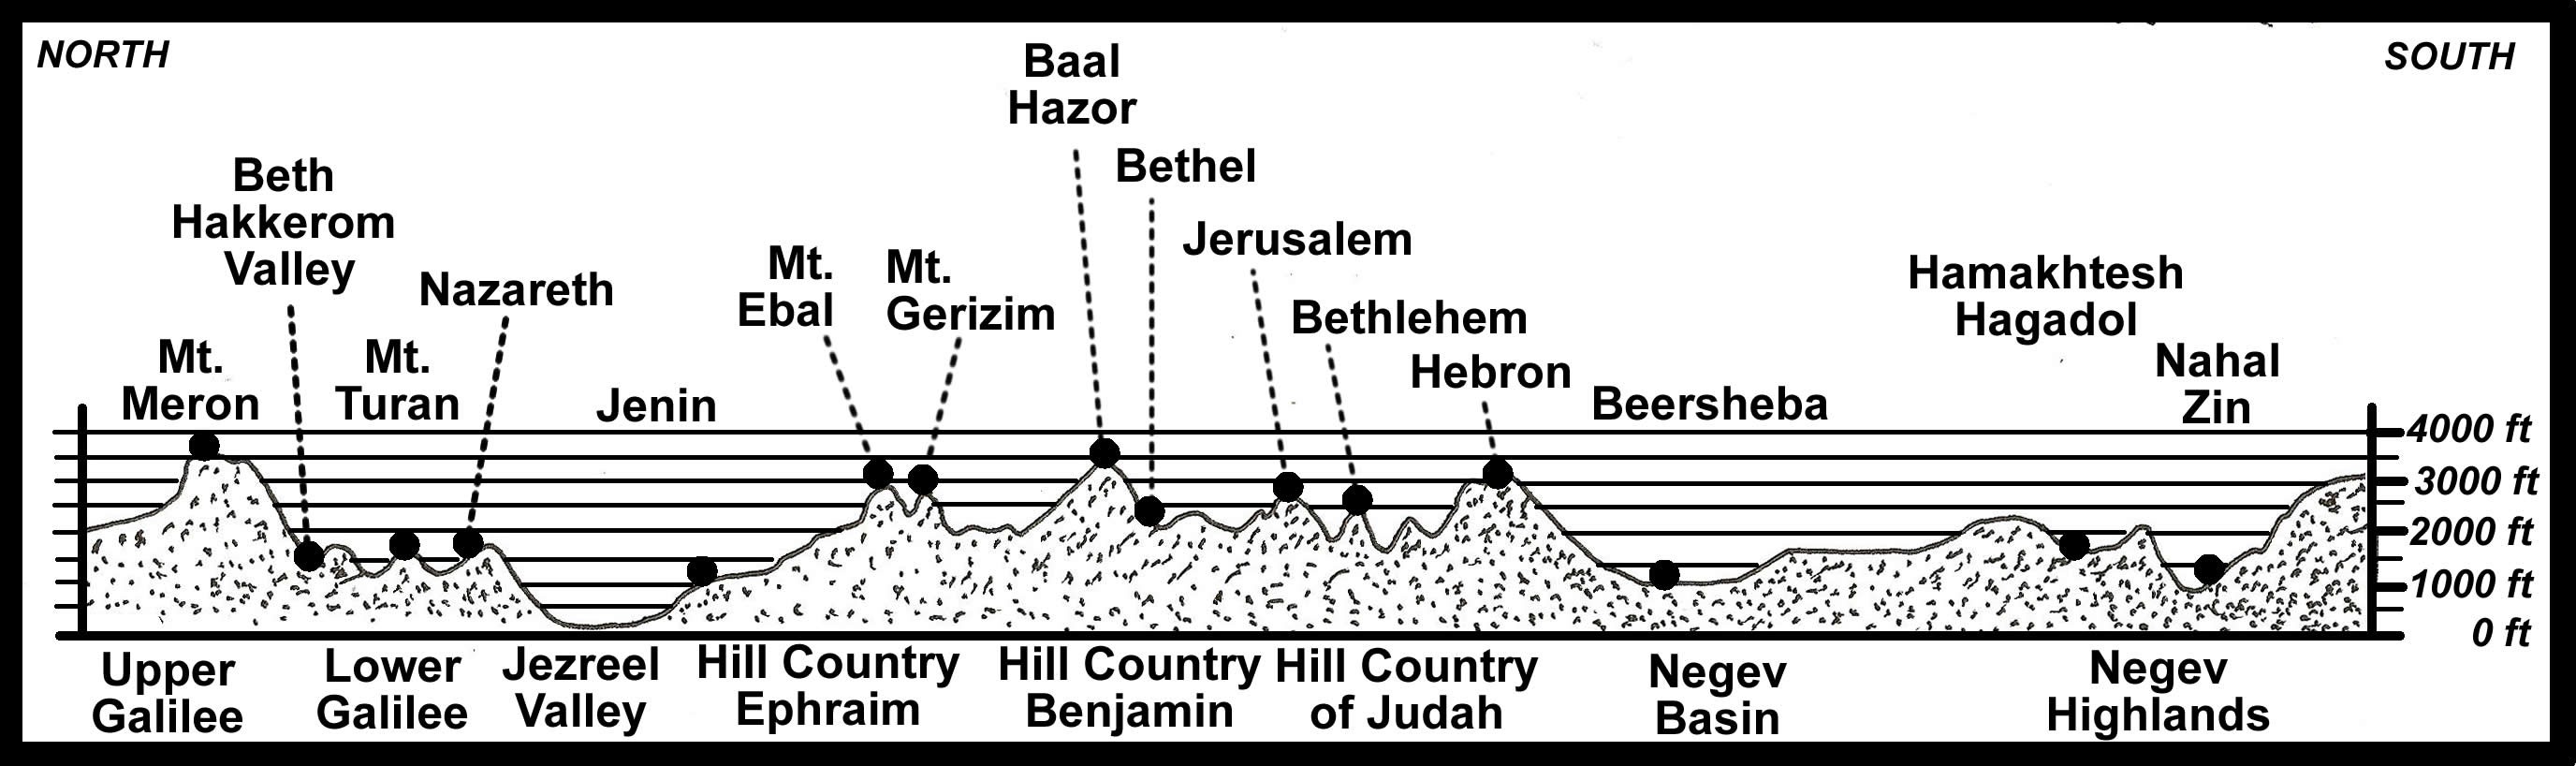 Topographical Cross-Section ofIsrael  NORTH-SOUTH